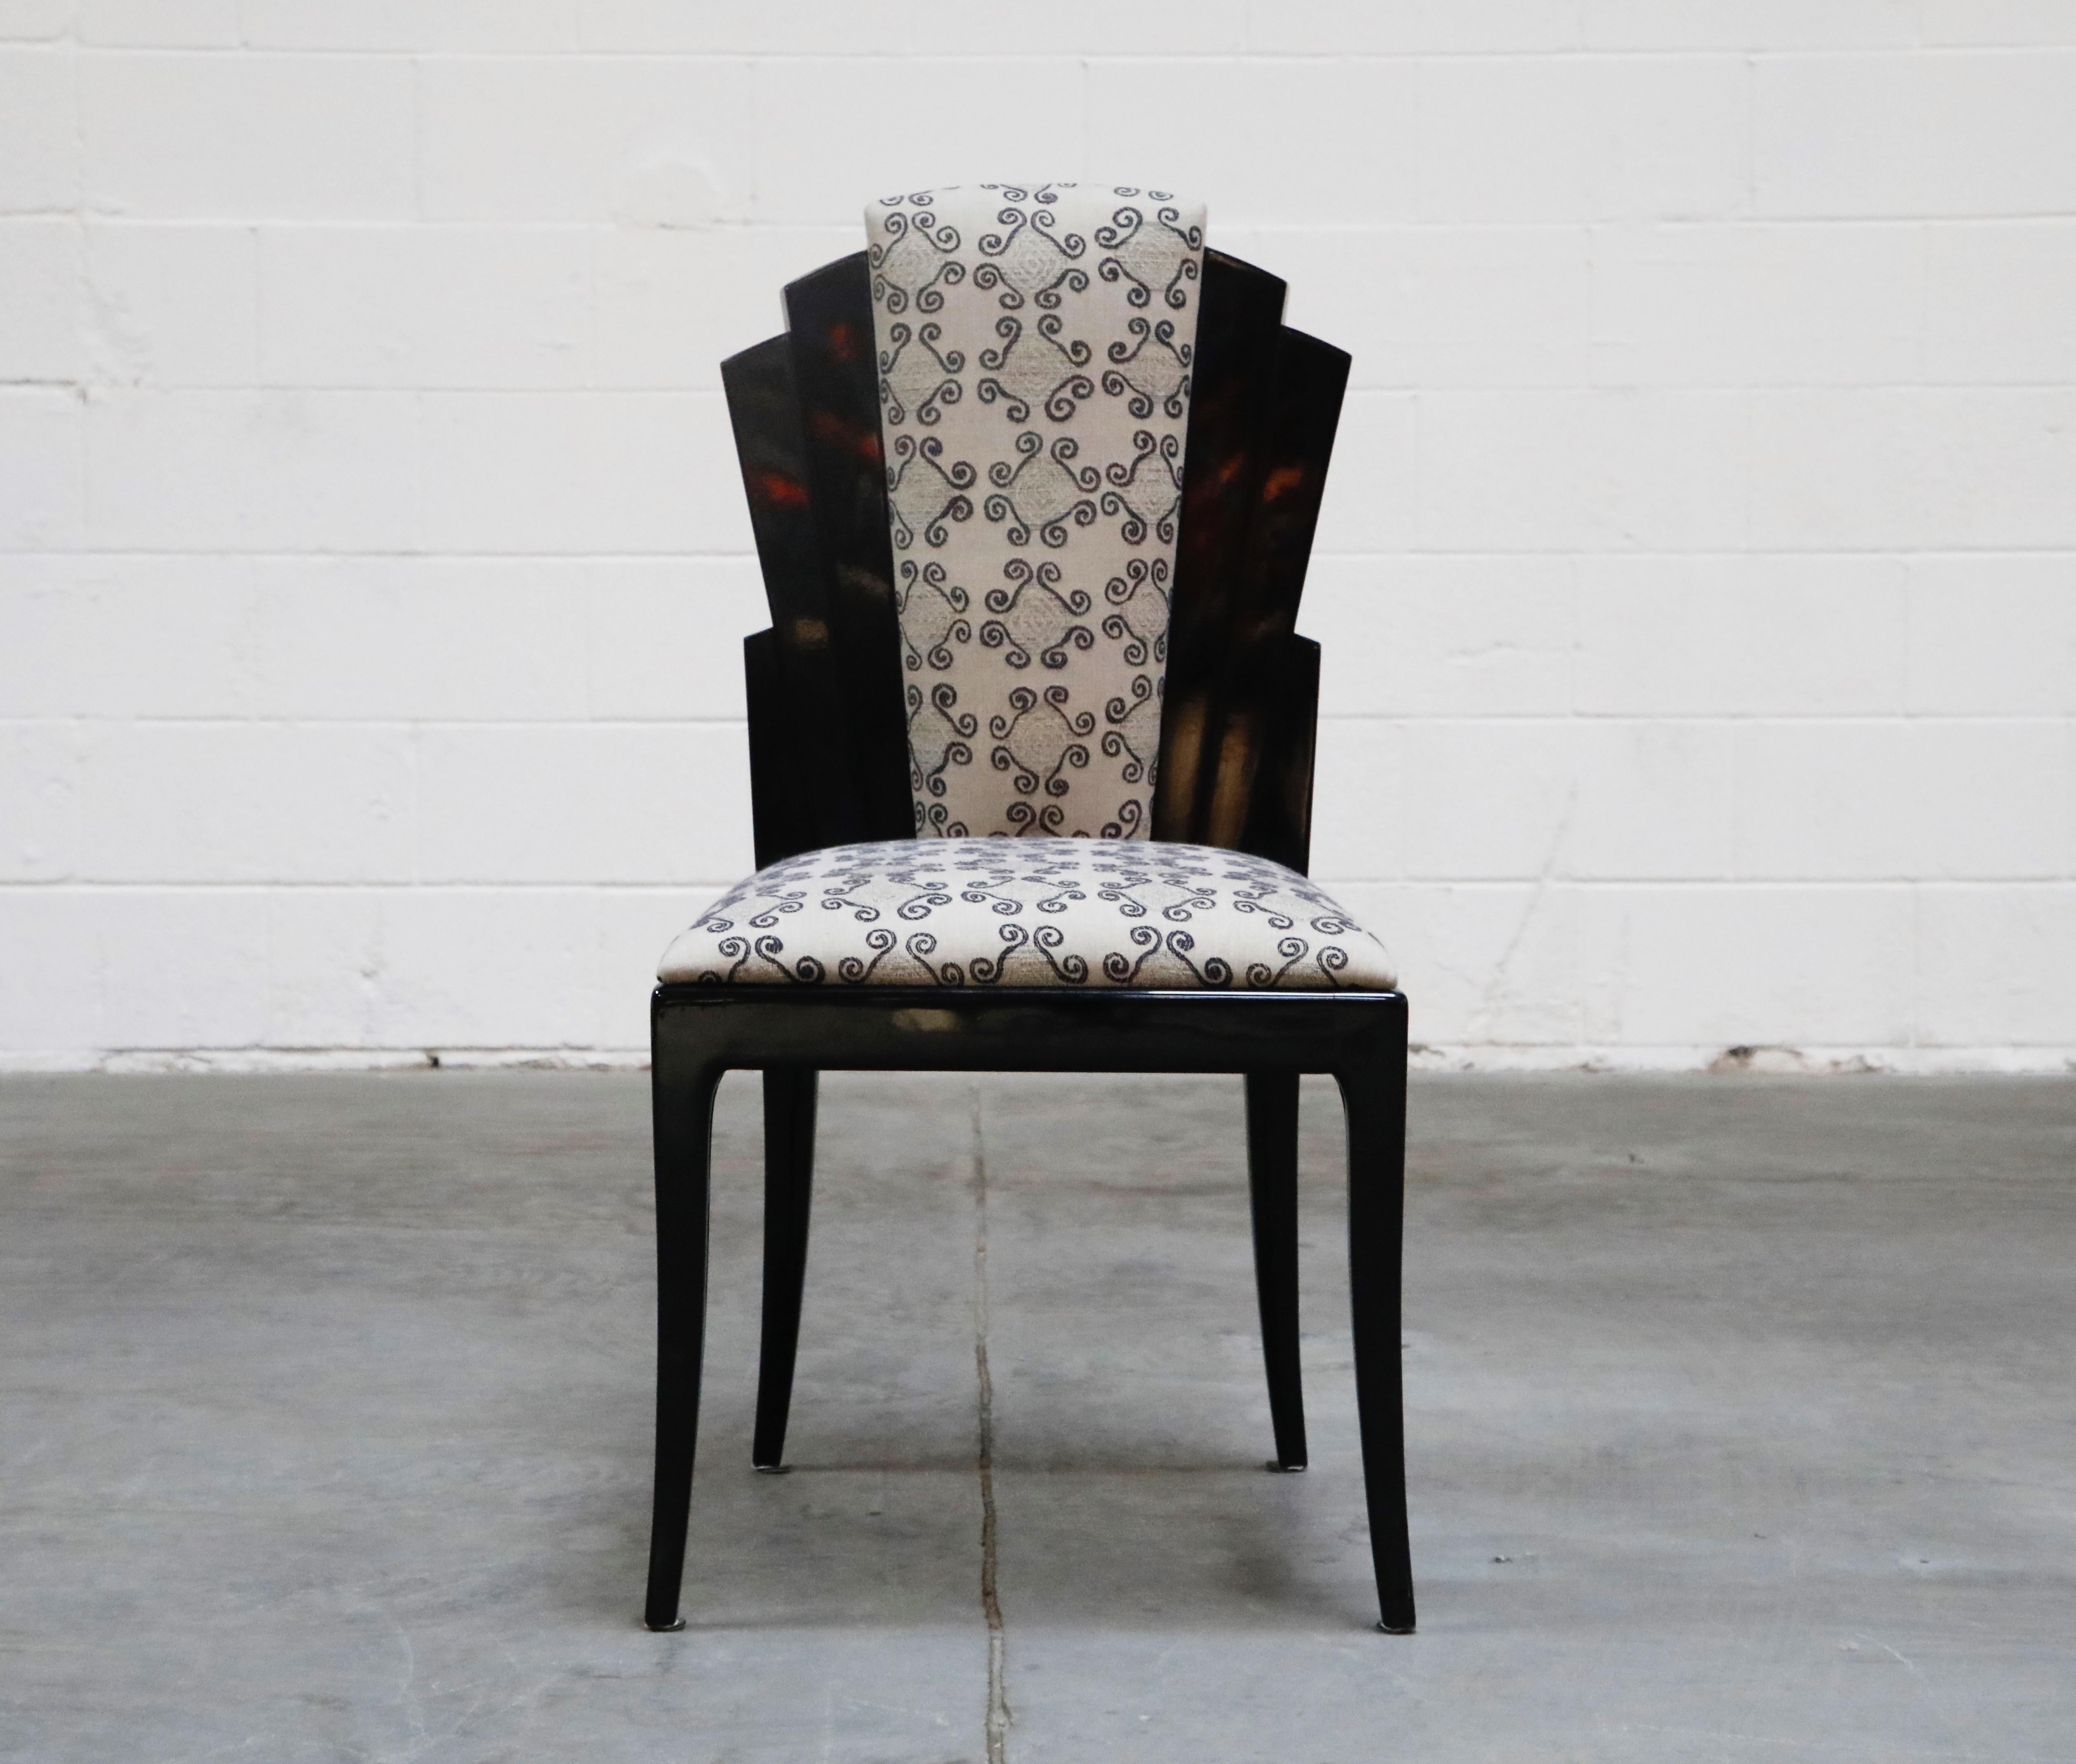 This set of 1980s Postmodern lacquered black dining chairs by Vladimir Kagan, comprised of a set of eight side chairs, are extremely high quality - these chairs have significant heft, not overly heavy but very solid hefty chairs demonstrating the